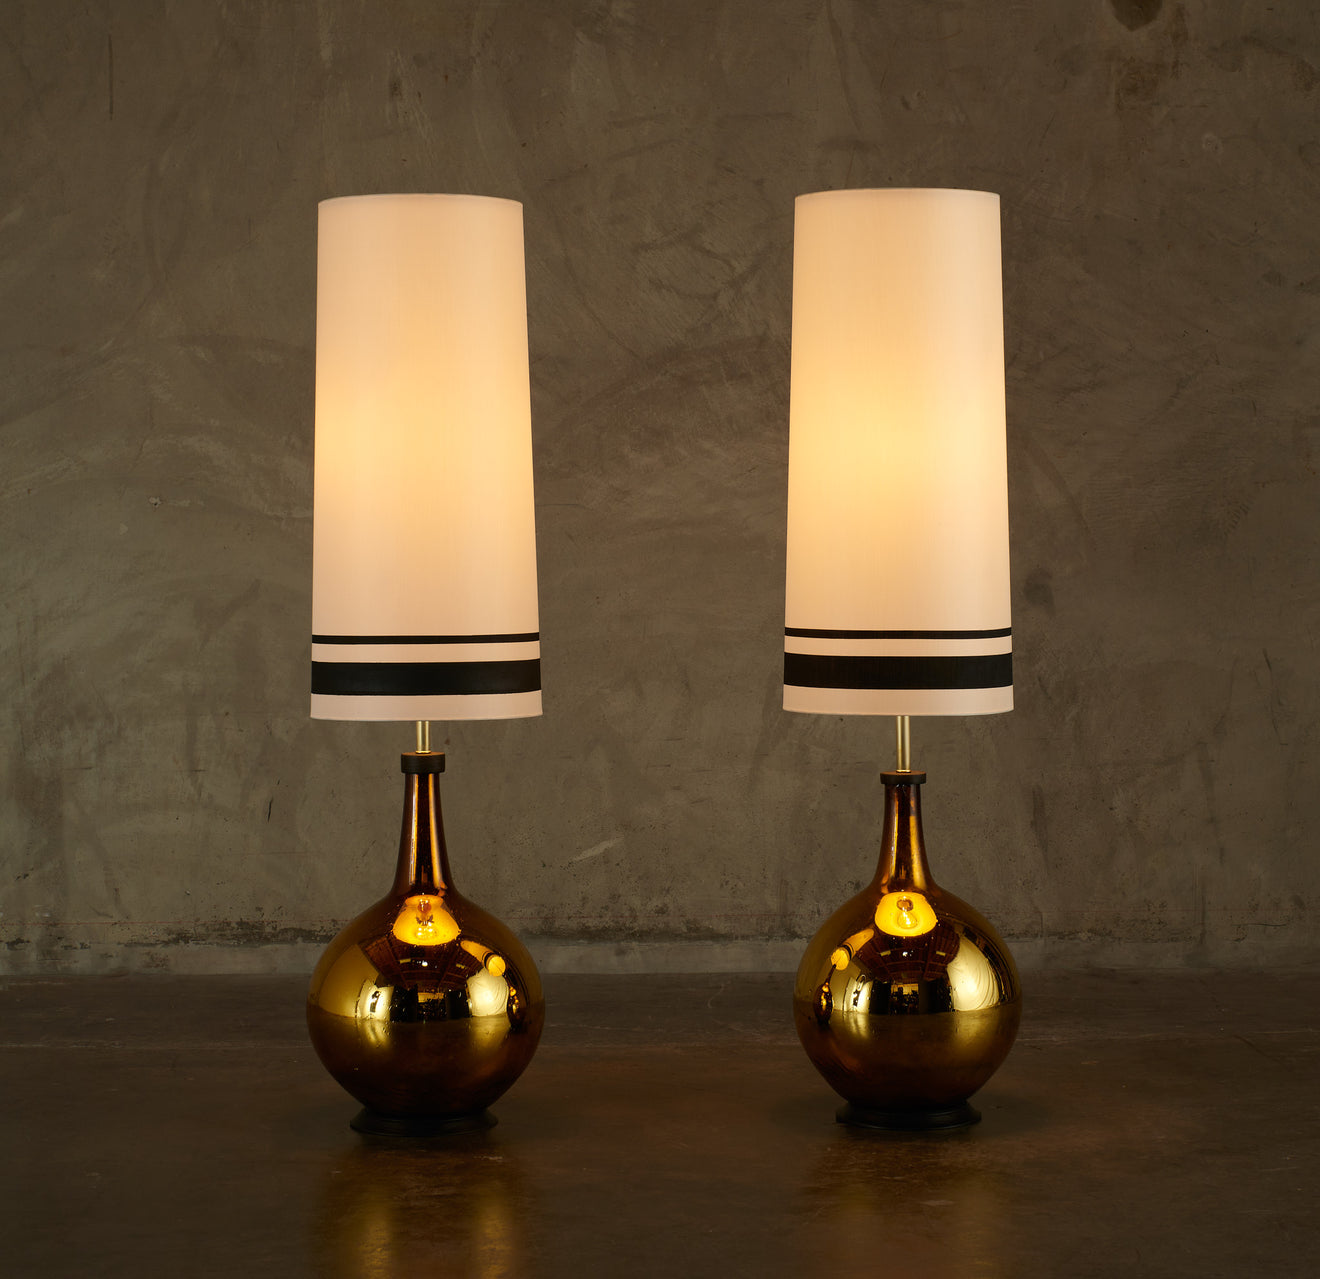 PAIR OF MONUMENTAL MERCURY GLASS LAMPS WITH CUSTOM PAINTED SHADES